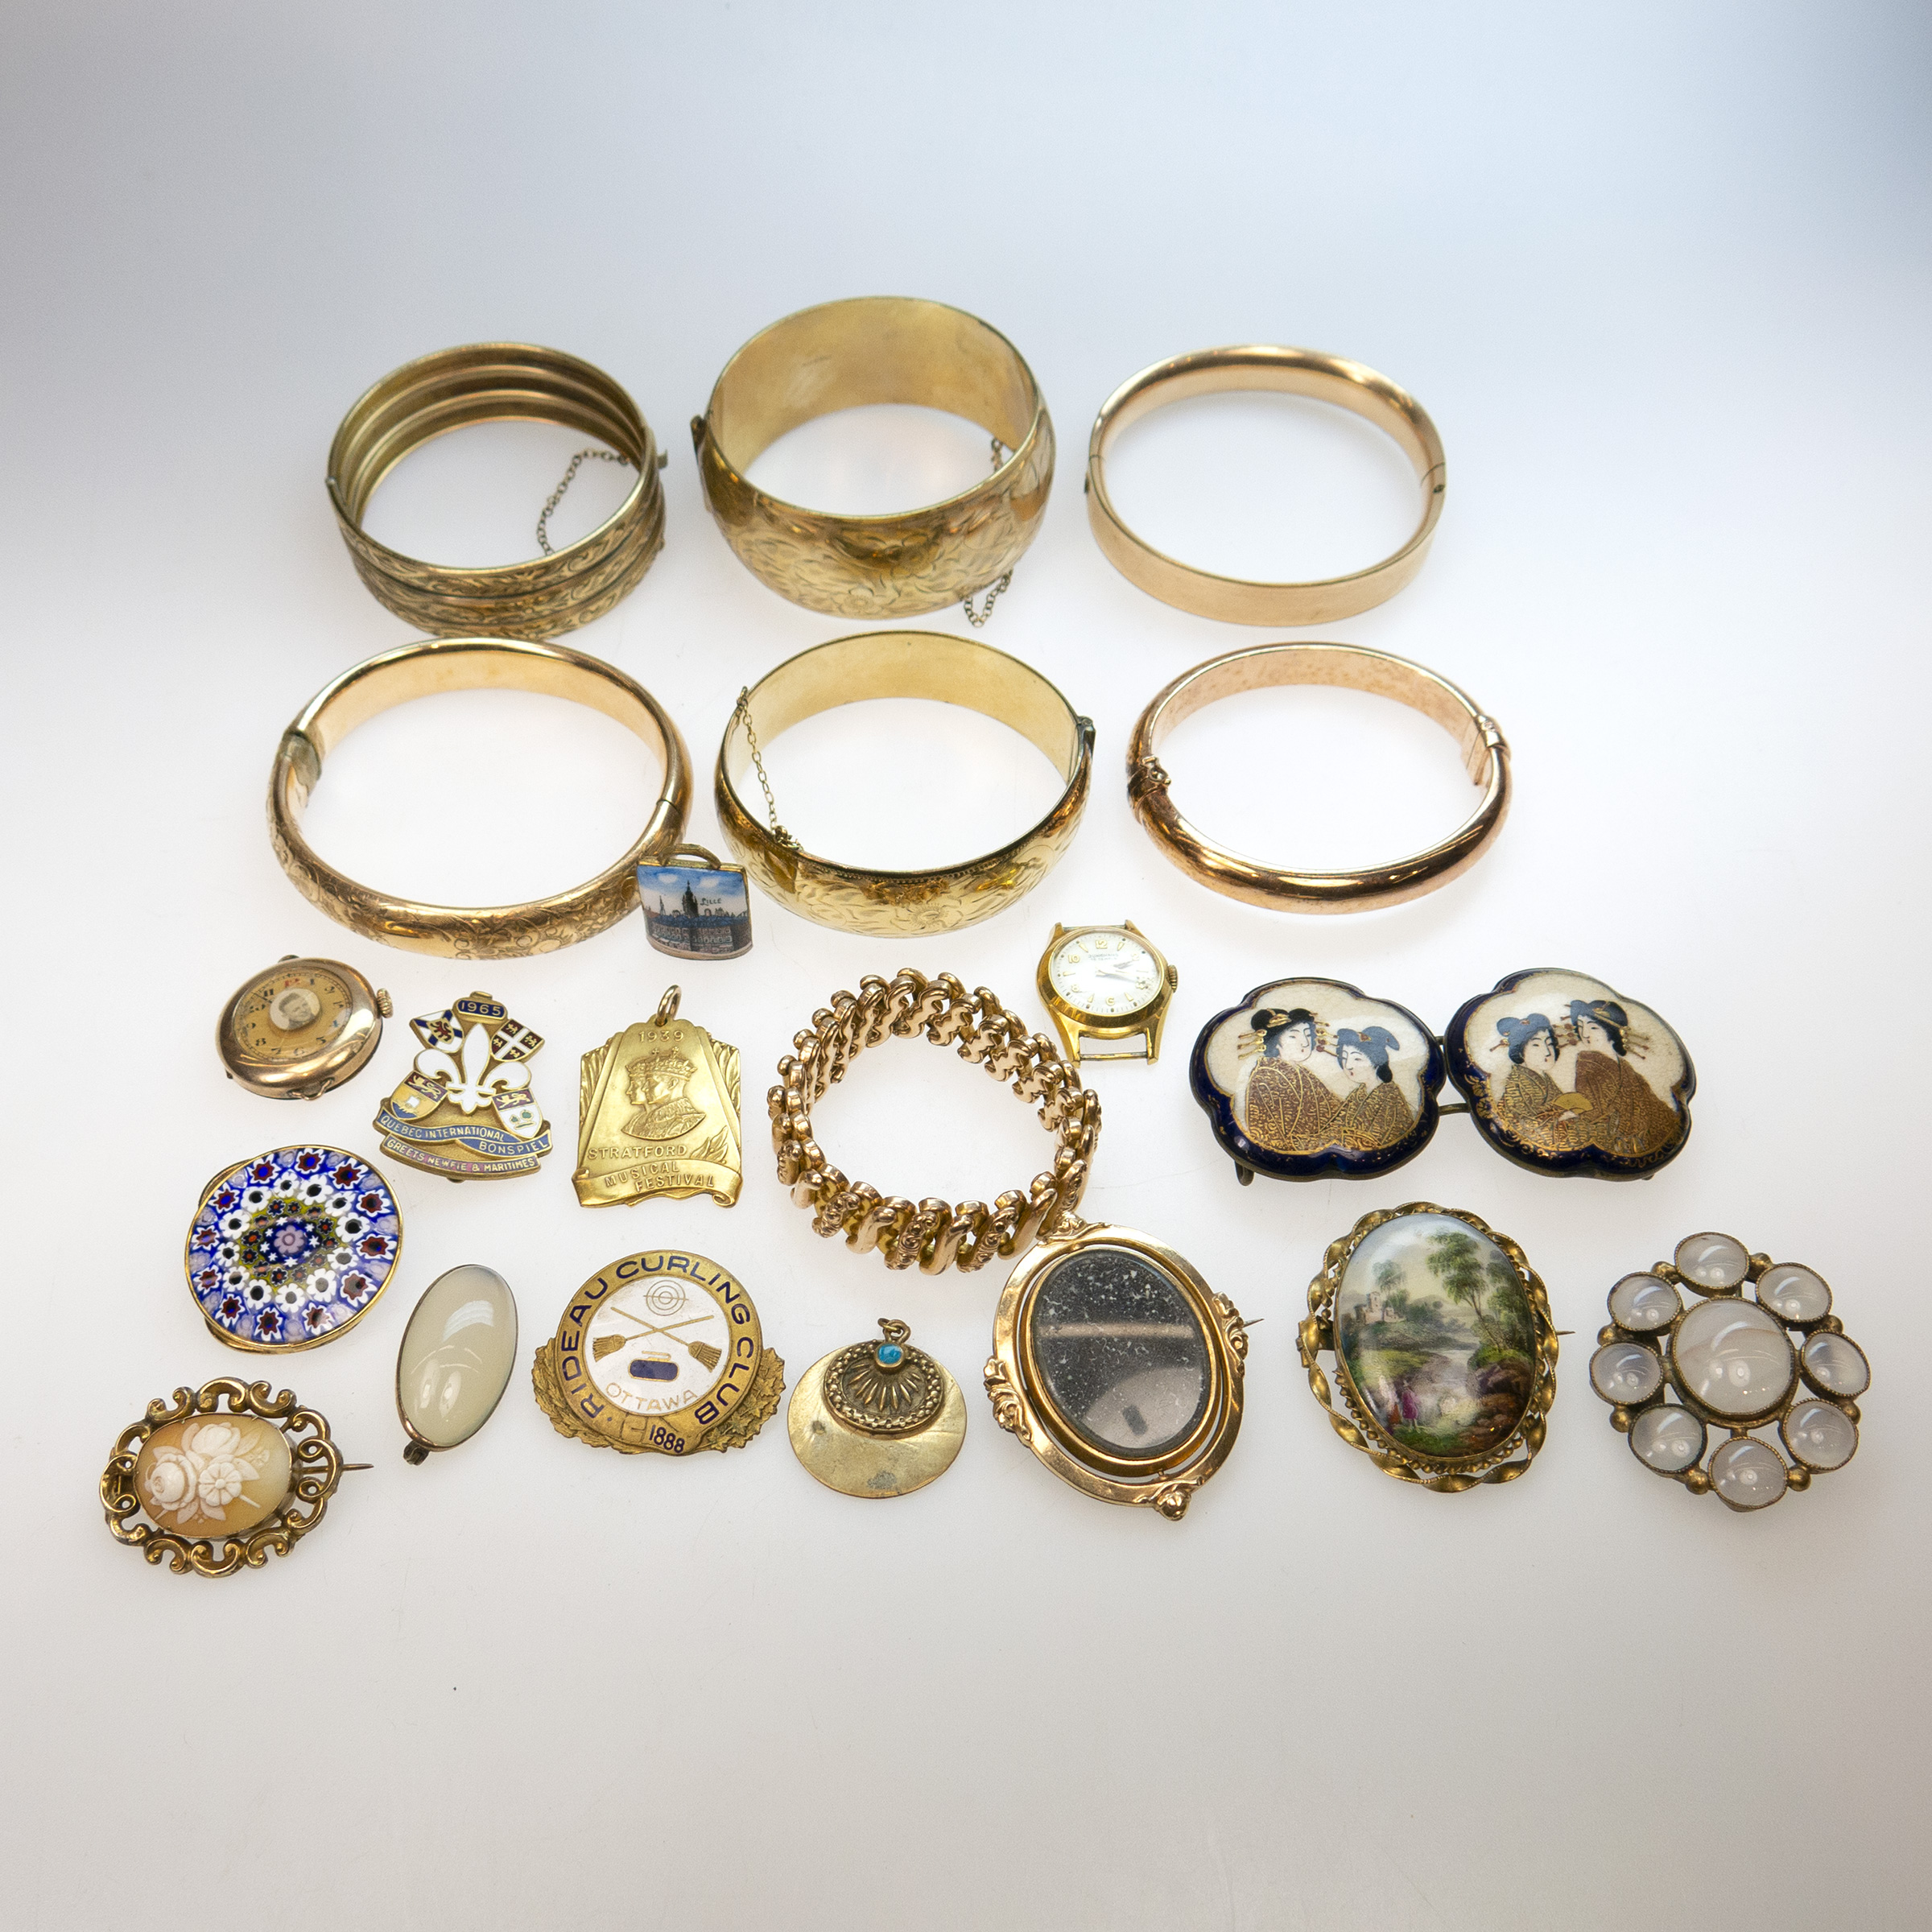 Quantity Of Gold-Filled Jewellery, Wristwatches, Etc.